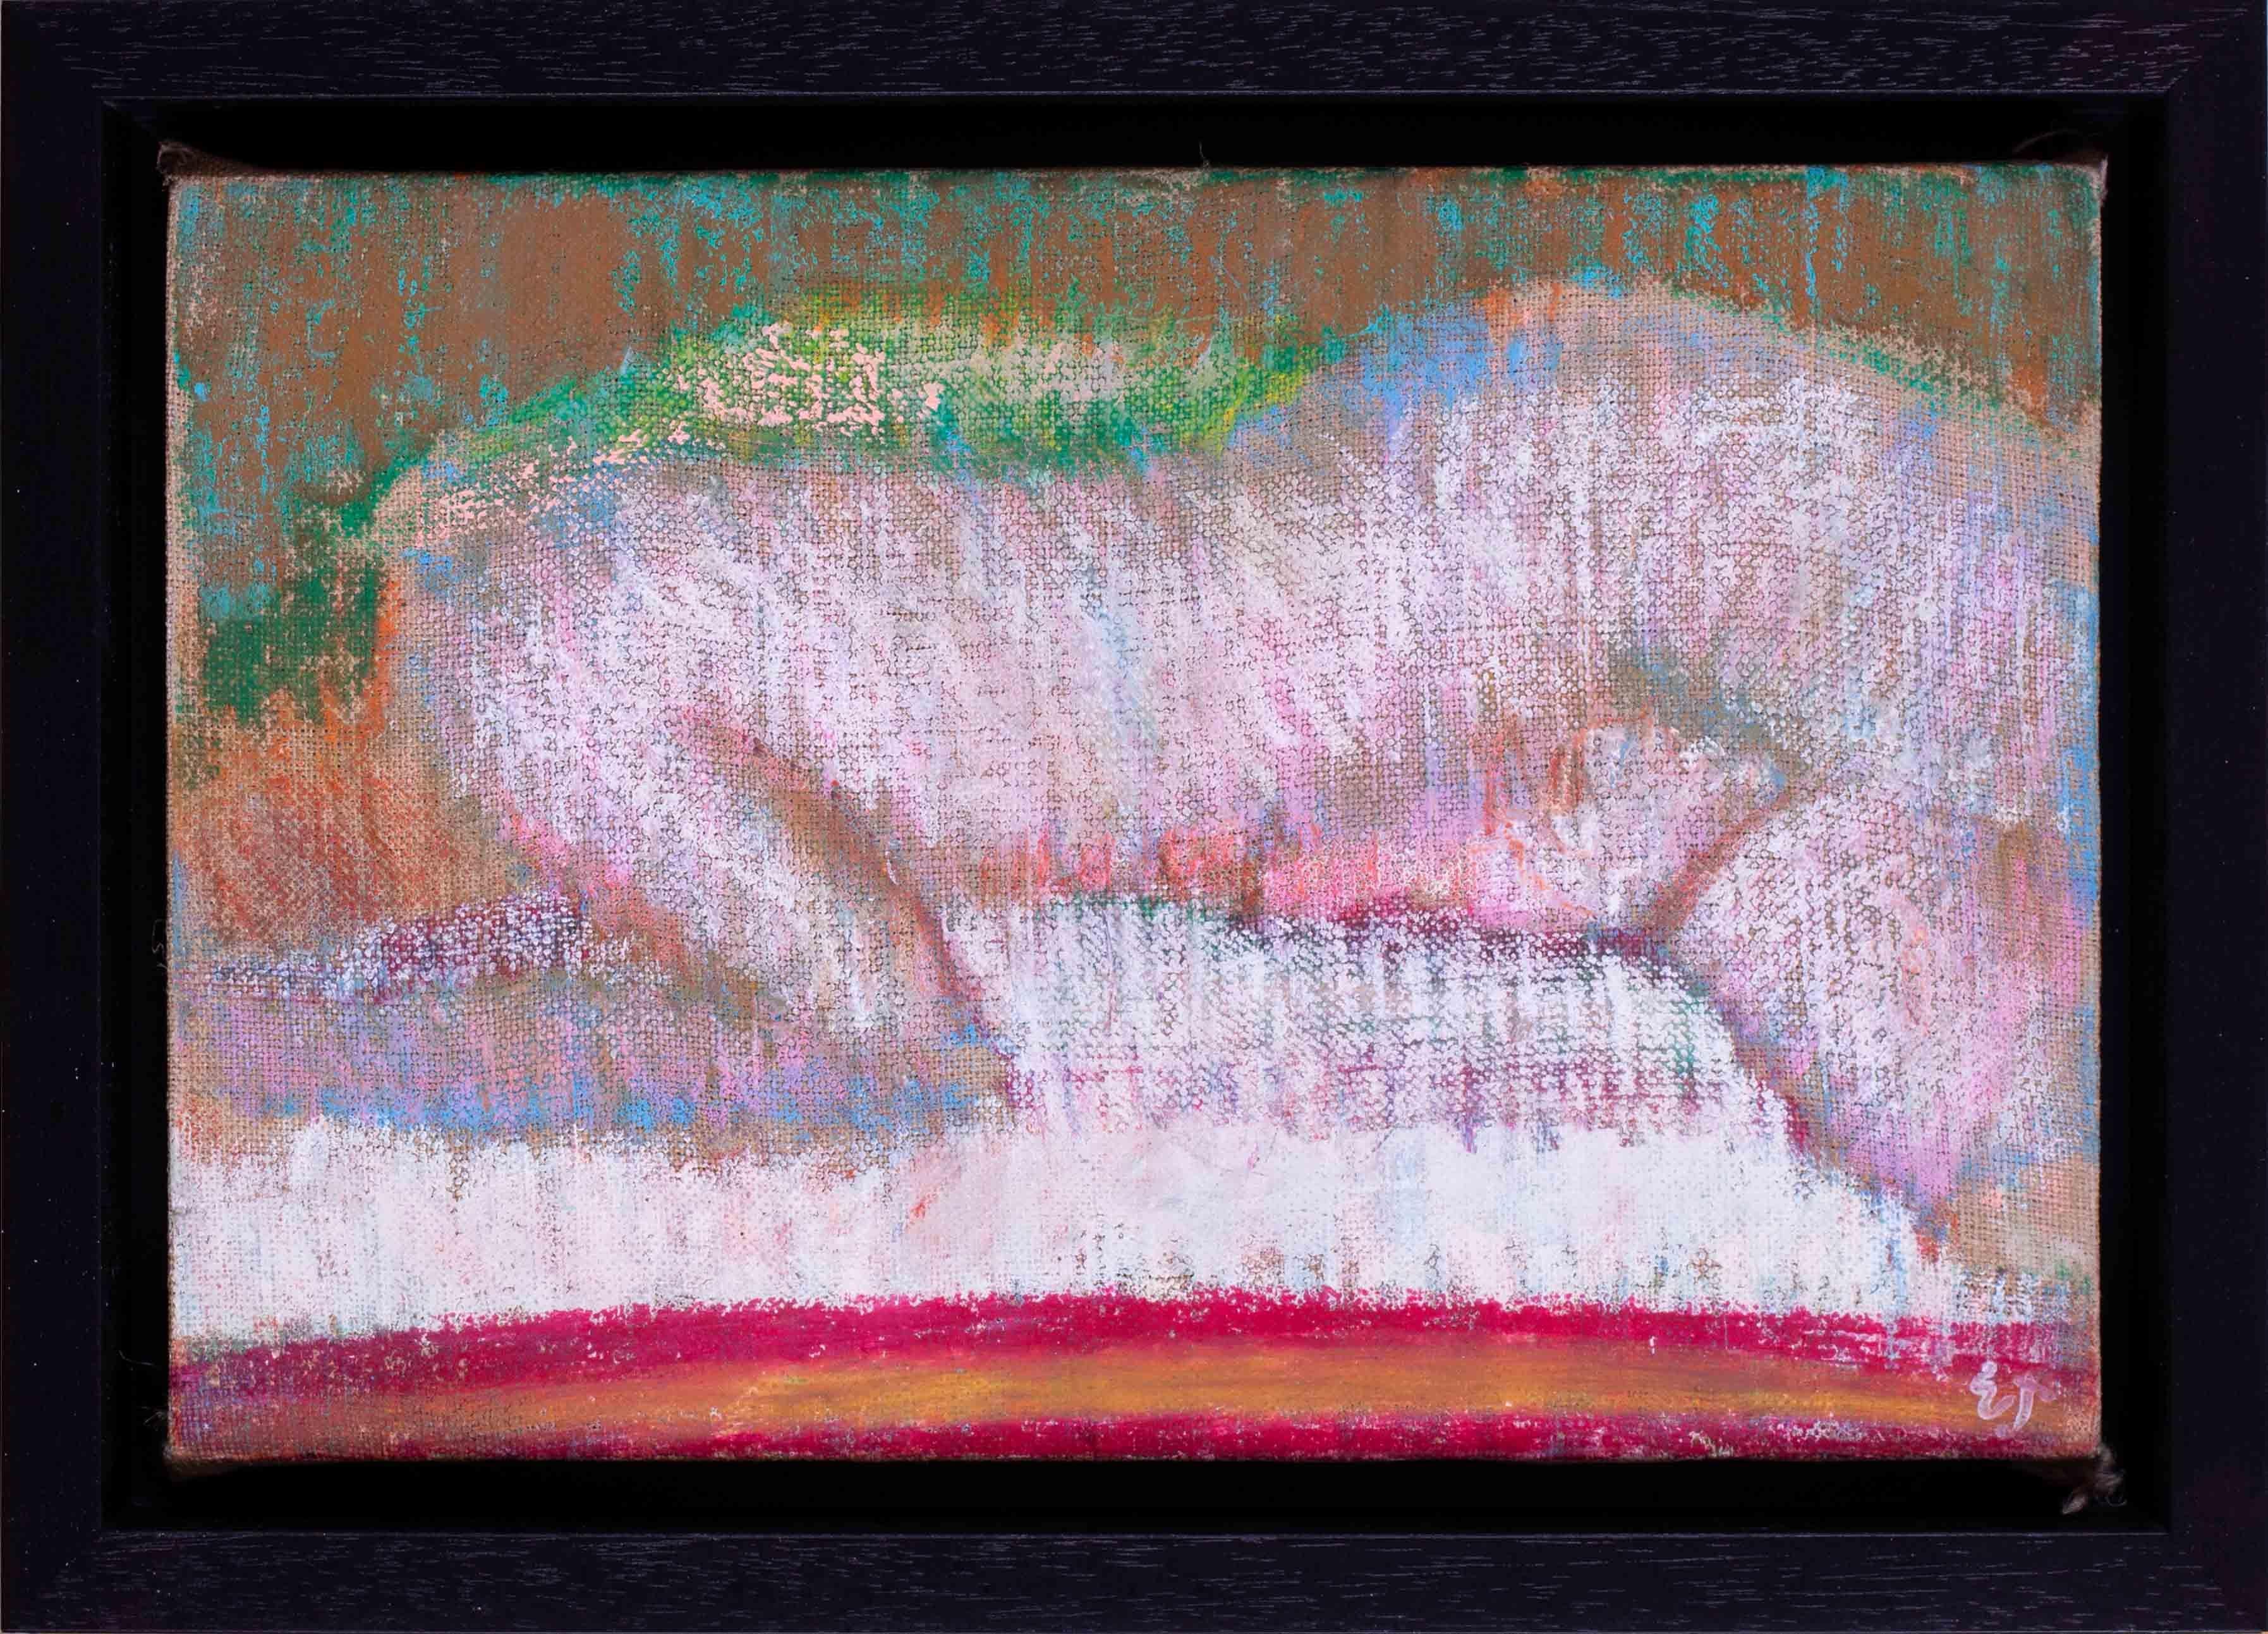 Nude oil pastel drawing by mid 20th Century British artist Ewart Johns